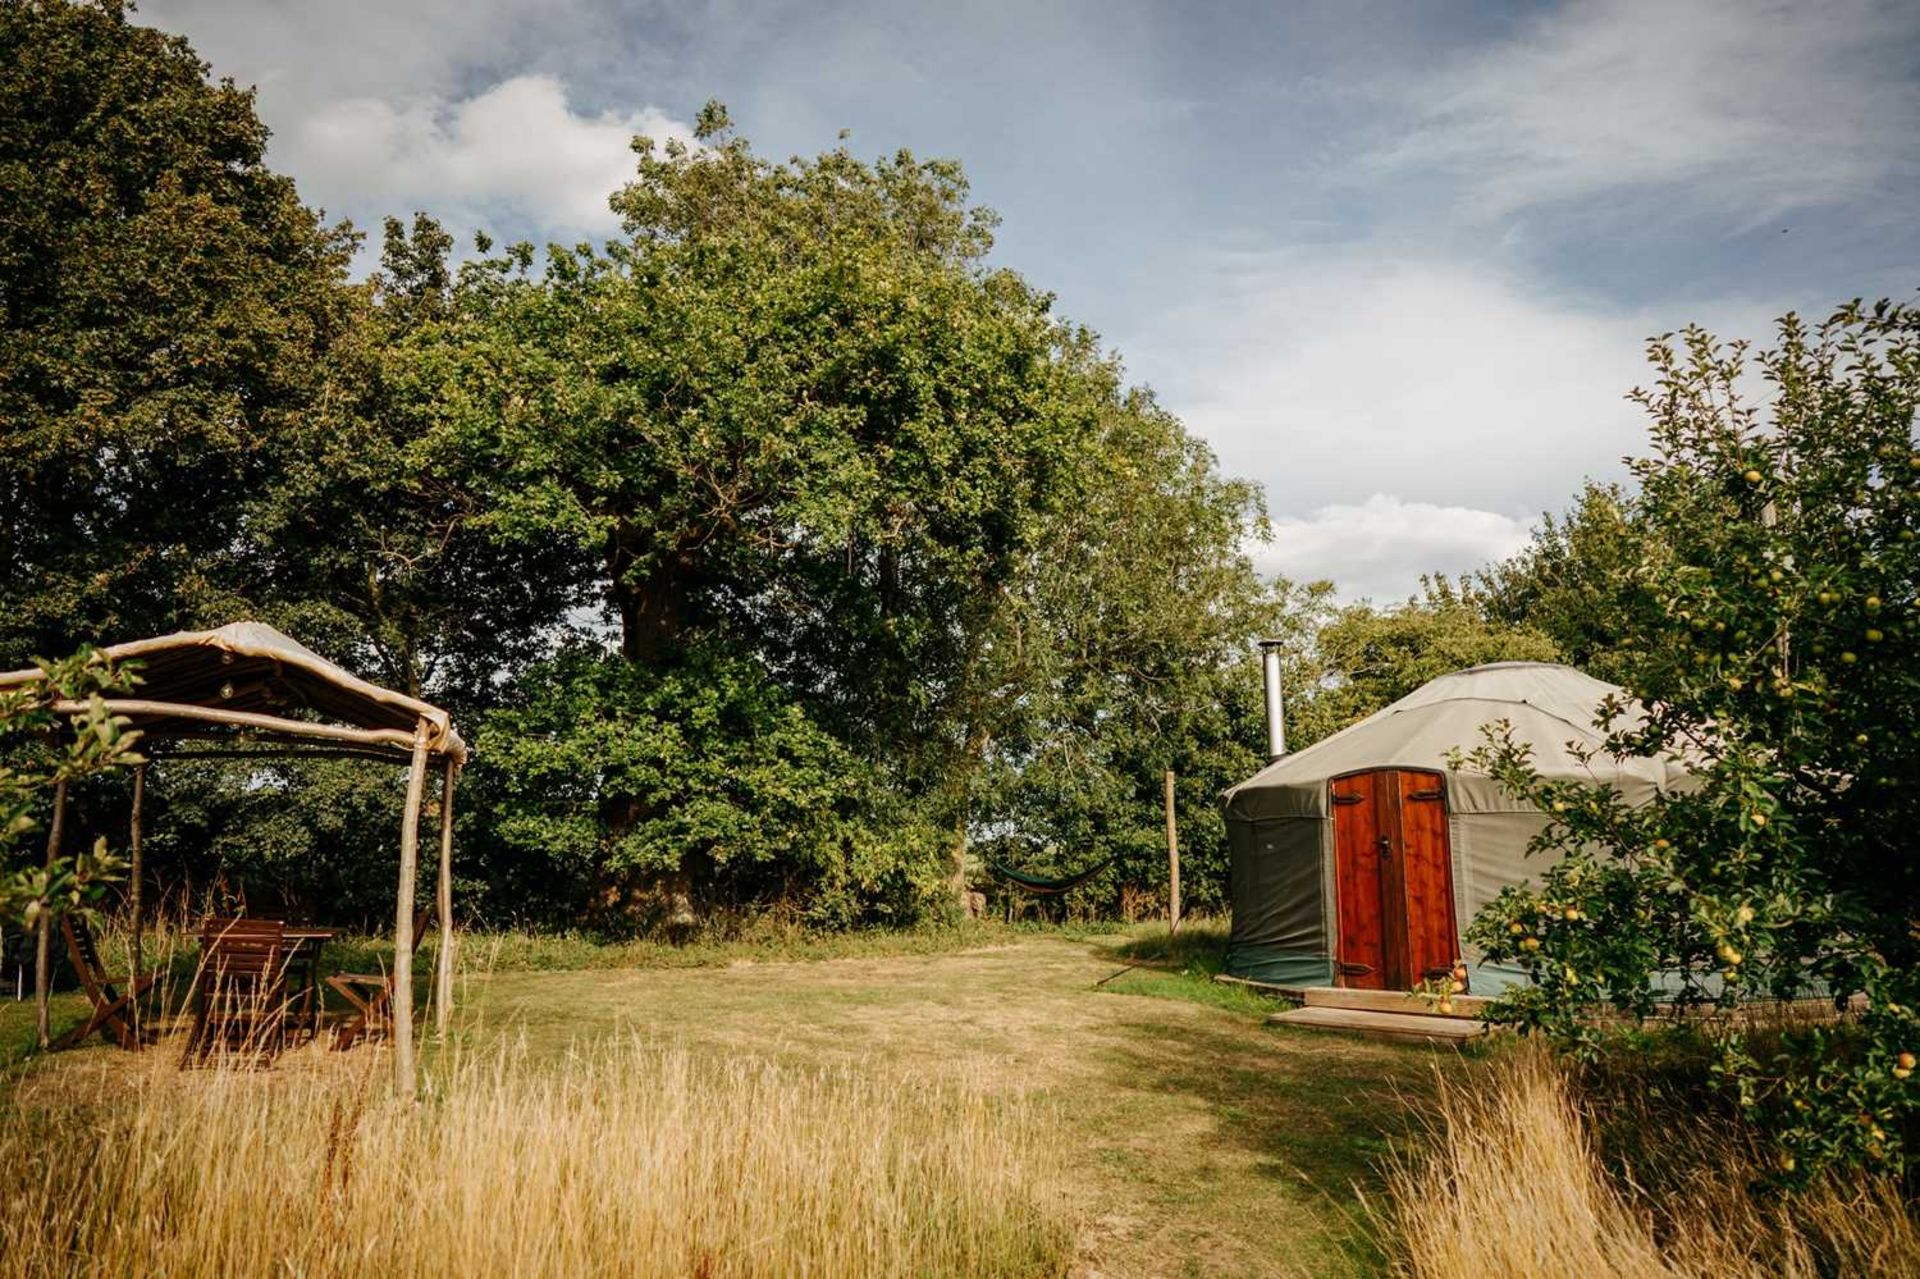 Glamping Experience for 2 nights for up to 4 guests with Suffolk Yurt Holidays Staying in one of our - Image 2 of 3